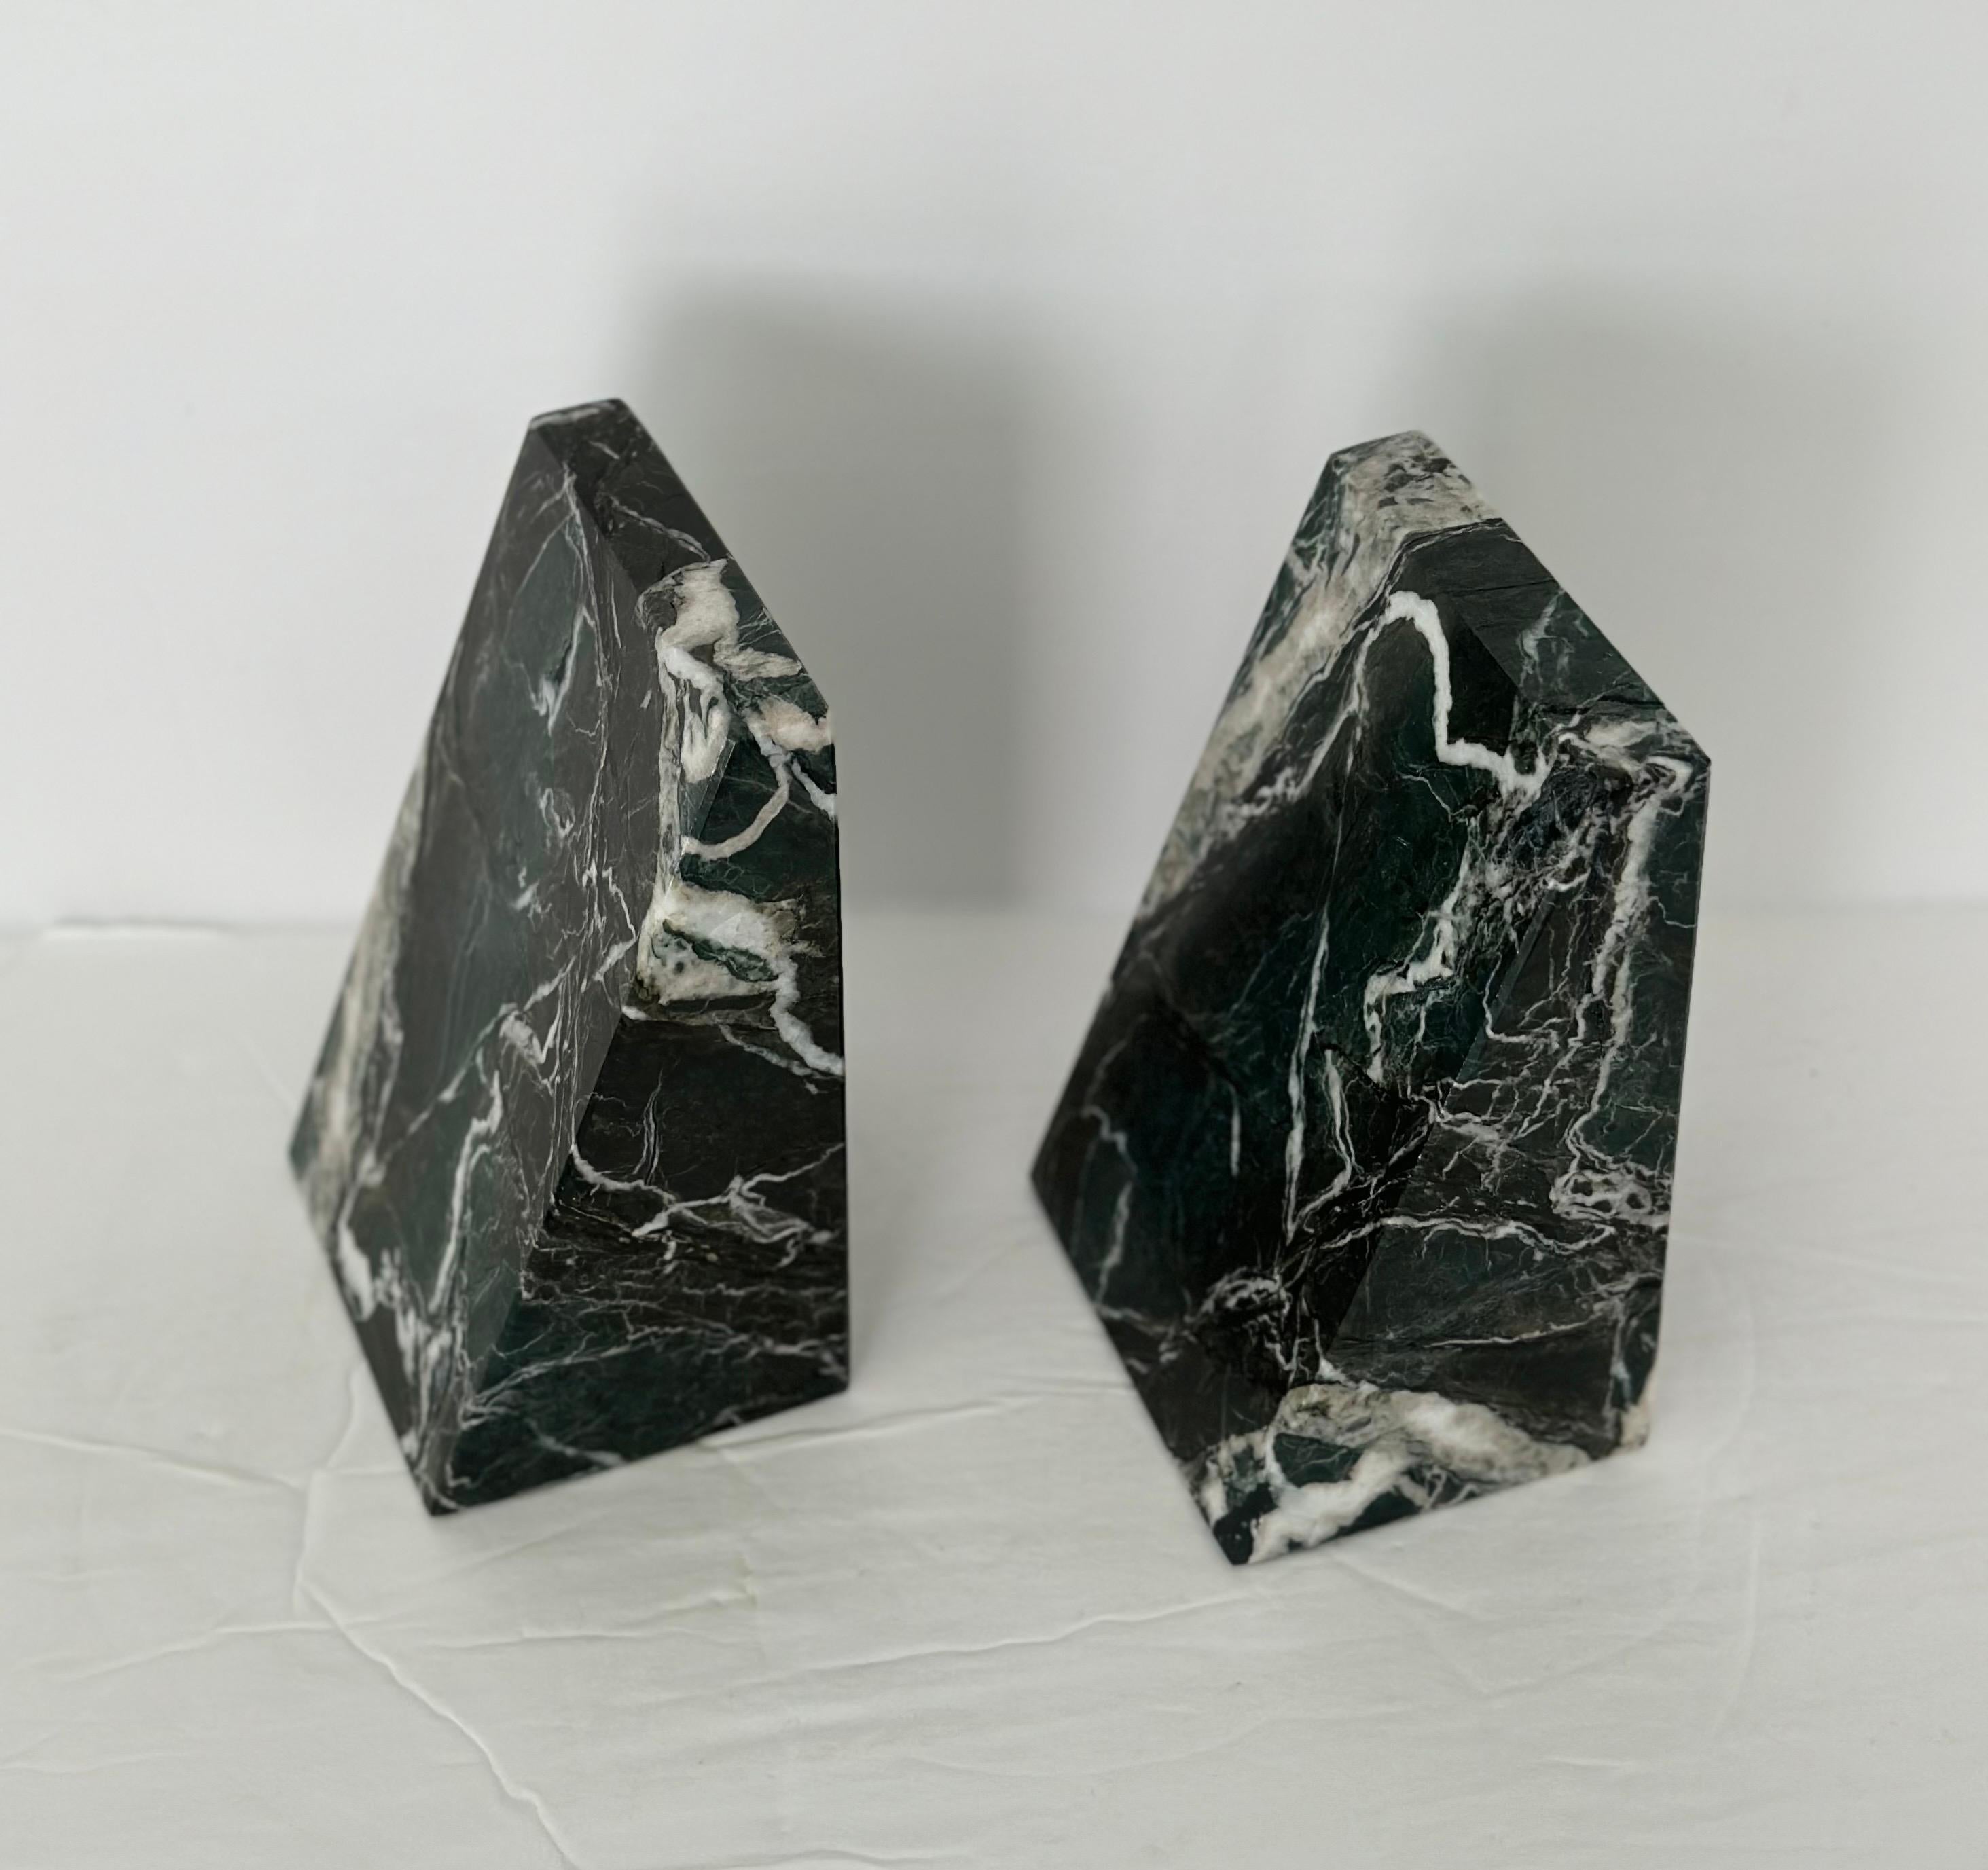 1970s Vintage Triangular Green and Black Marble Bookends - a Pair In Good Condition For Sale In Farmington Hills, MI